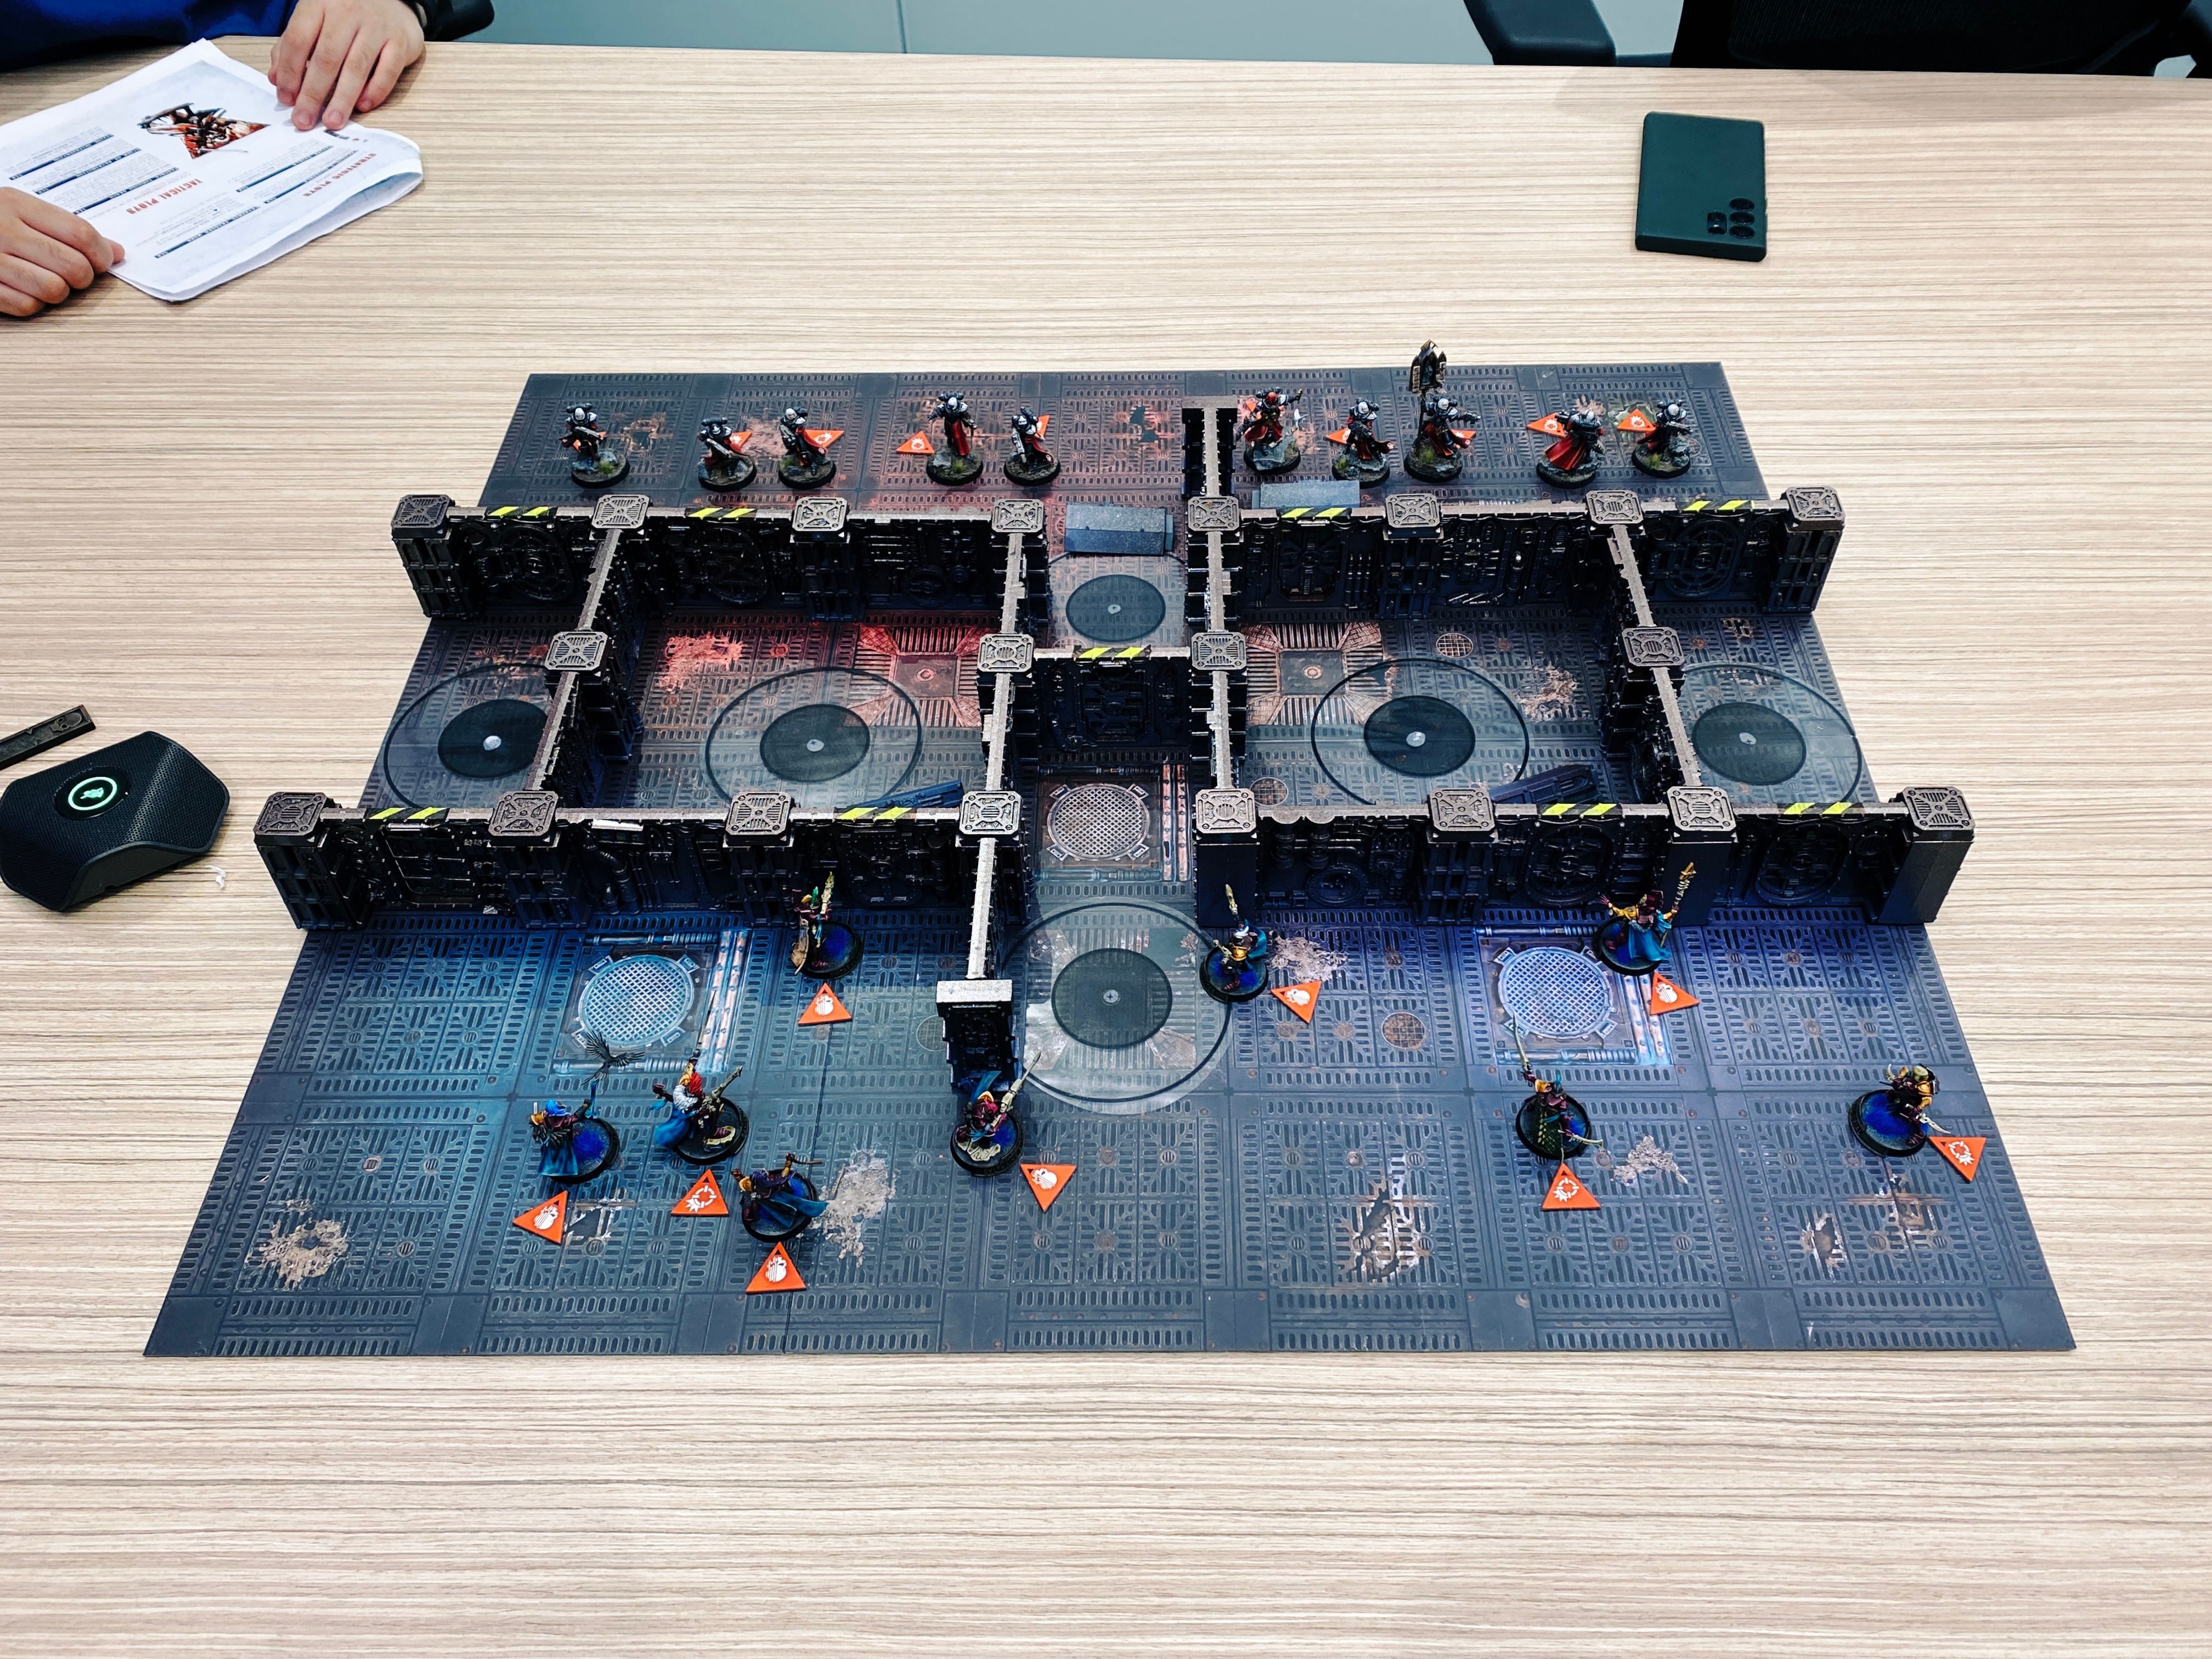 A photo of a game of Warhammer 40,000: Kill Team. The board looks like the metal of the inside of an ancient steampunk starship, and the terrain is a bunch of walls all connected together in the same steampunk style to form number of interconnecting rooms. Closest to the camera are my forces, the Aeldari (think space elves) in elegant fuchsia-coloured armour, and facing them on the other side of the board are ten heavily-armoured human warrior women in black armour and red cloaks, all with striking white hair.